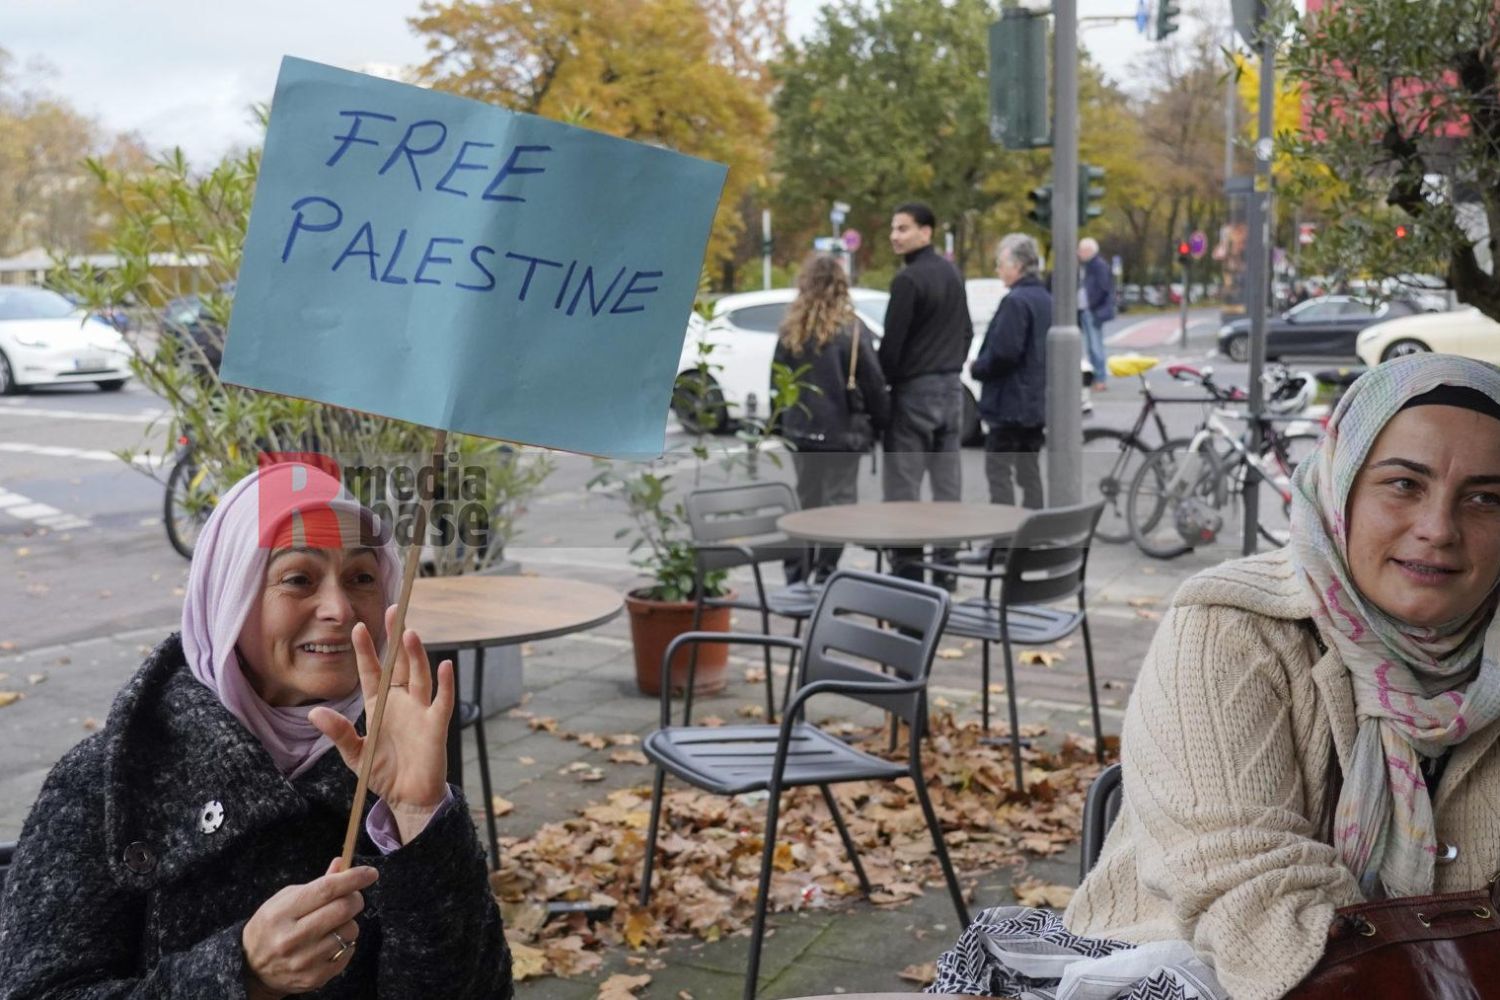 Palistinians and Jews FOR PEACE <i>Bild jovofoto/R-mediabase</i> <br><a href=/confor2/?bld=77771&pst=77735&aid=23&dc=1546&i1=jovofoto/R-mediabase>Anfrage Download Bild 77771</a>  <a href=/wp-admin/post.php?post=77771&action=edit> / Edit</a><br><a href=/?p=77735>Zum Beitrag 77735</a>